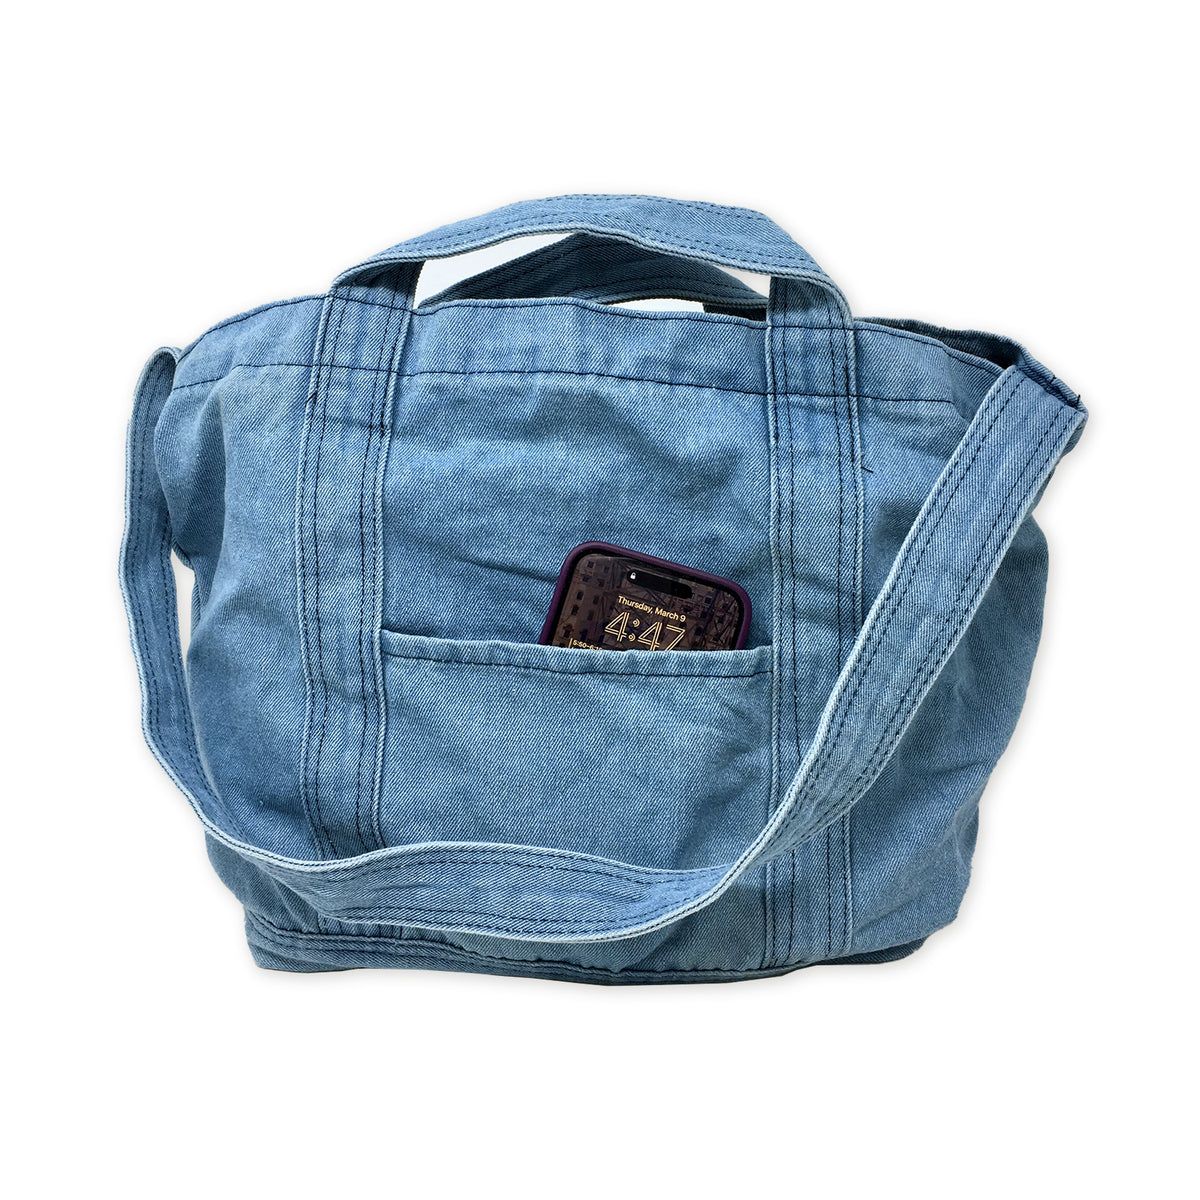 Buy Denim Tote Bag, Jean purses for women denim, Bojo Blue Jean Tote with  multiple shades of denim which make the patterns of this denim bag, jean  tote bag for women with